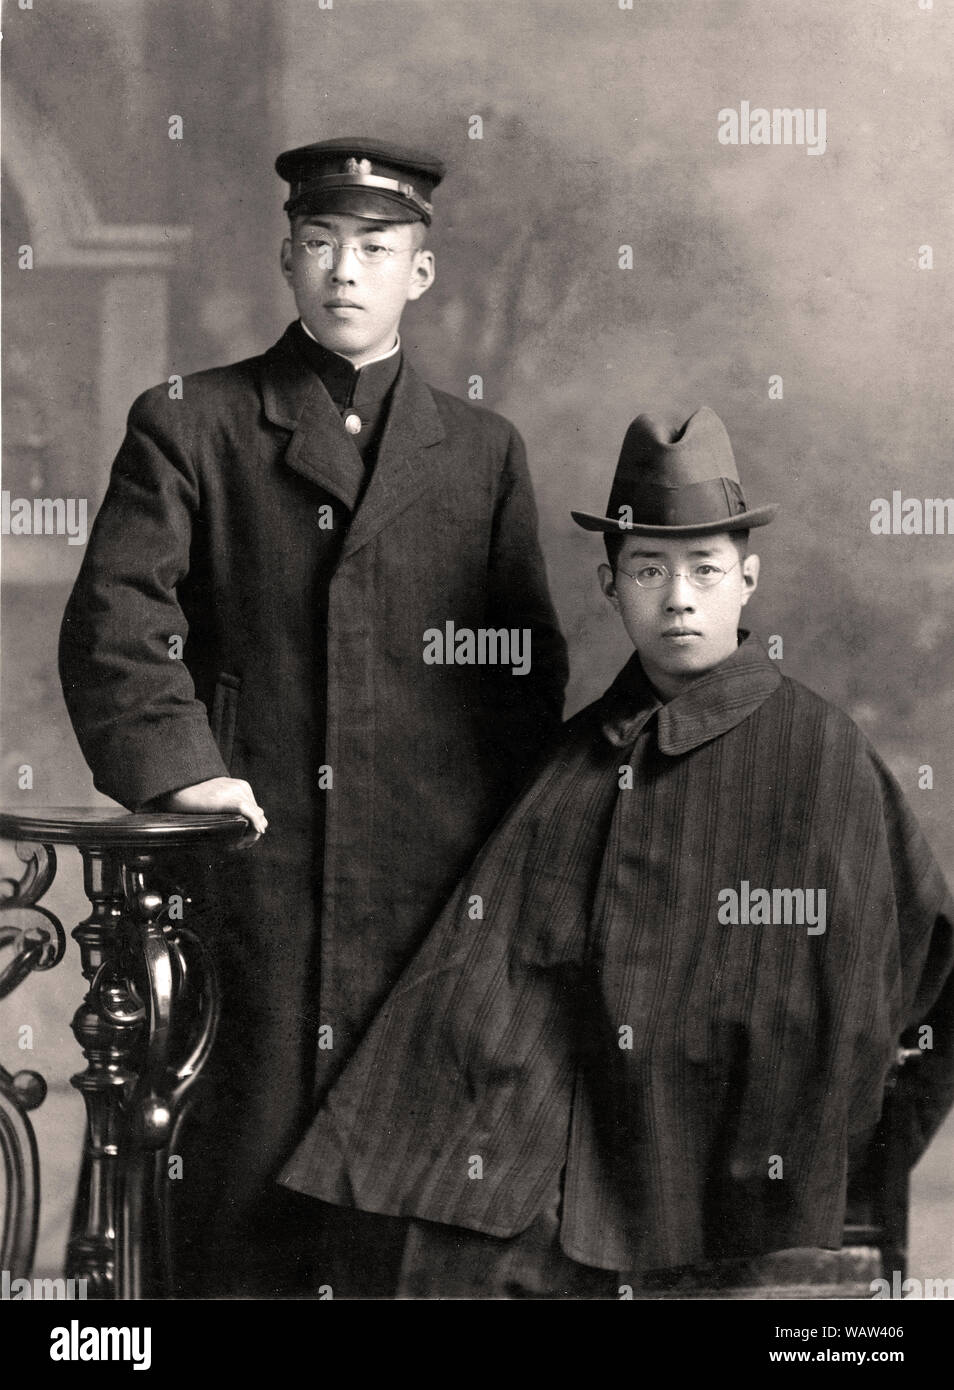 [ 1910s Japan - Japanese Tonbi Coat and Uniform ] —   Two brothers, 20 and 21 years old in December 1912 (Taisho 1). One wears a university uniform, the other an Inverness style tonbi coat.   The tonbi coat, a perfect fusion of Japanese and Western styles, was first introduced around 1887 (Meiji 20), but reached its zenith of popularity during Taisho (1912-1926) and early Showa (1926-1989). The coat was especially popular with intellectuals.  20th century vintage gelatin silver print. Stock Photo